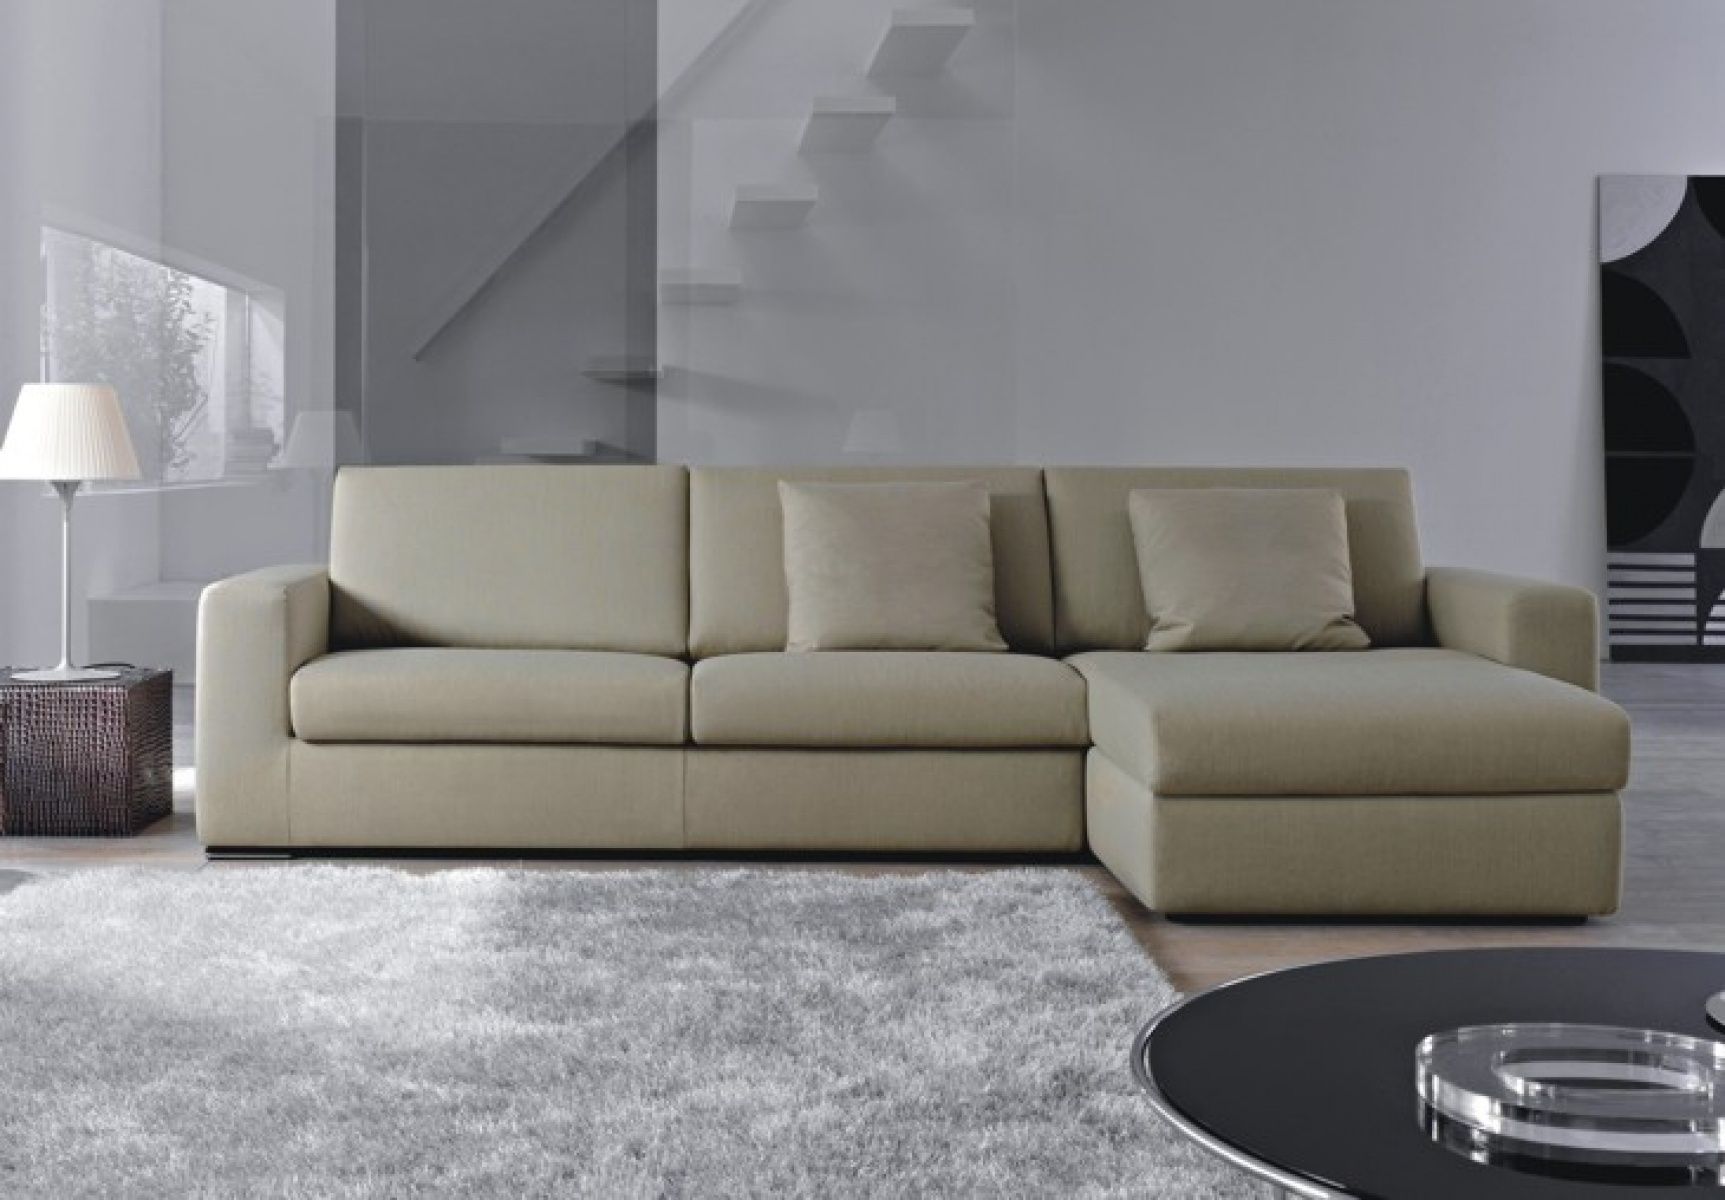 leather corner sofa in the style of the living room